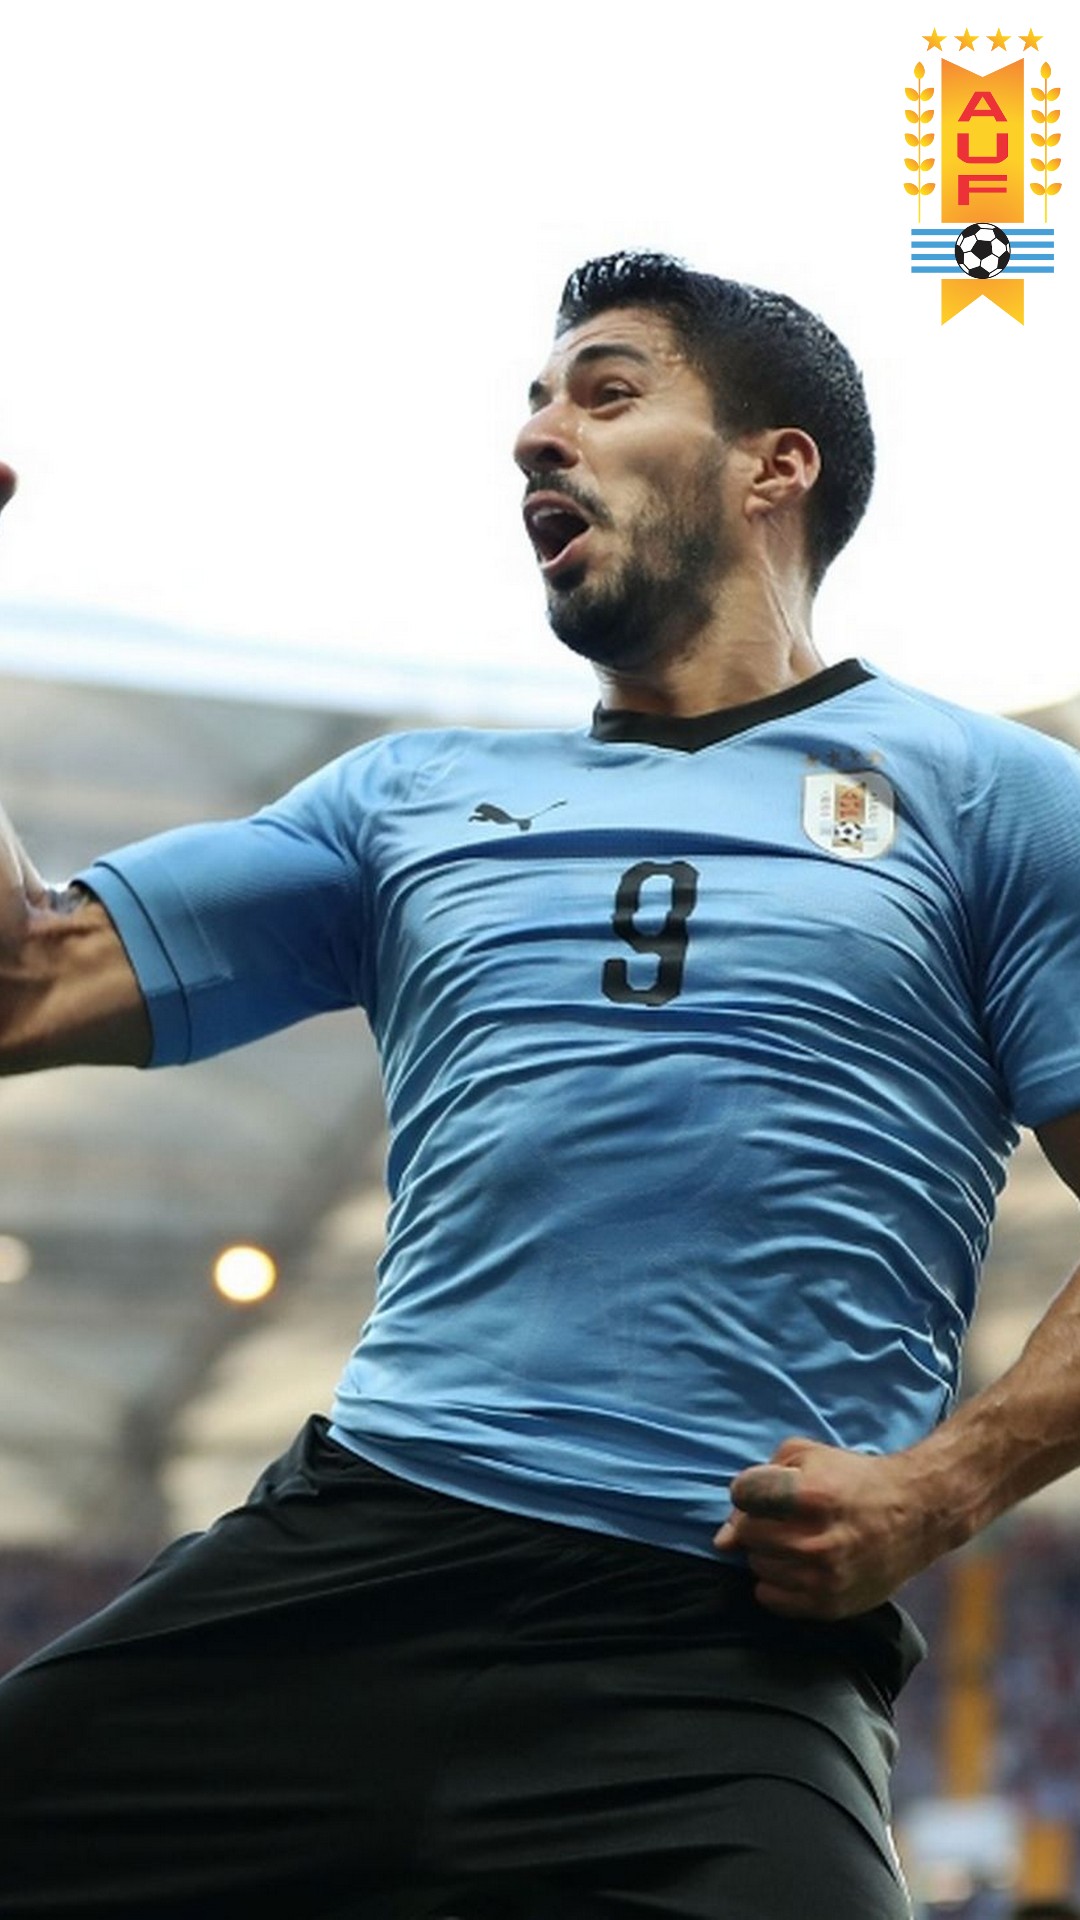 Wallpaper Luis Suarez Uruguay Mobile With Resolution 1080X1920 pixel. You can make this wallpaper for your Mac or Windows Desktop Background, iPhone, Android or Tablet and another Smartphone device for free